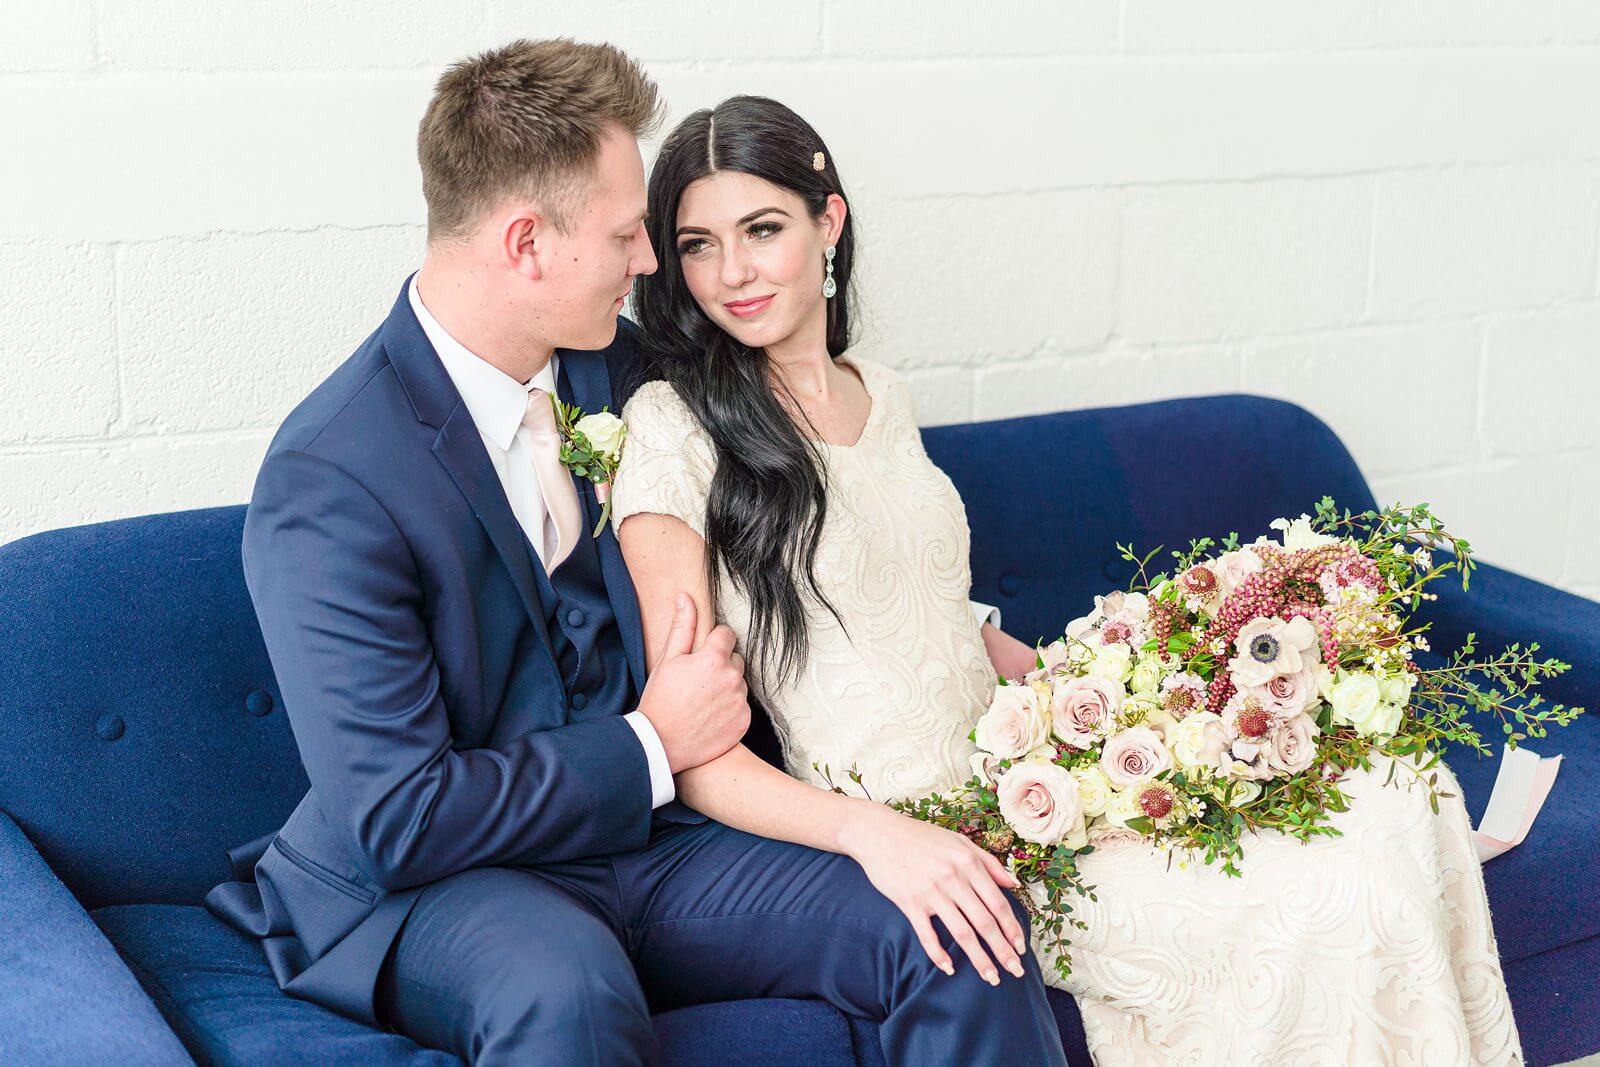 a groom wearing a navy blue and his bride wearing a cream colored short sleeved wedding dress sit on a navy colored couch at Studio Miesh in Salt Lake City